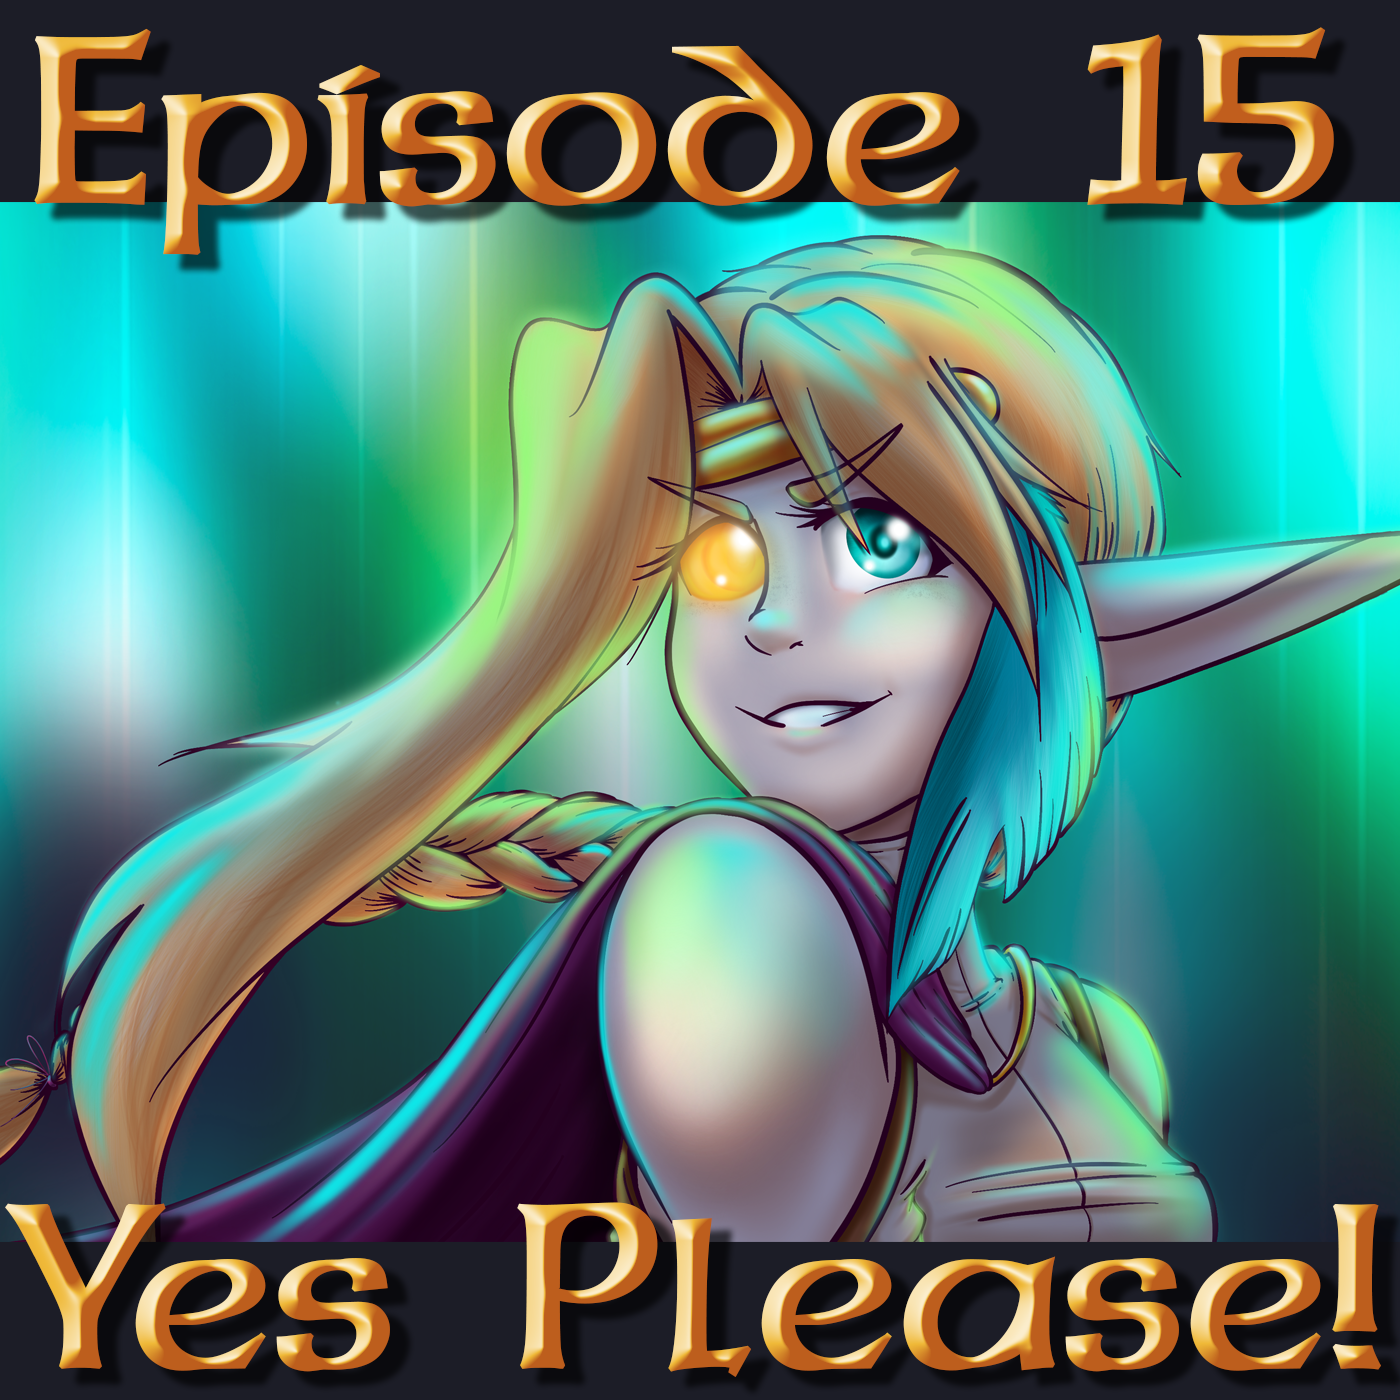 Yes Please! Episode 15: A New Friend (Check Please S1 54.5)